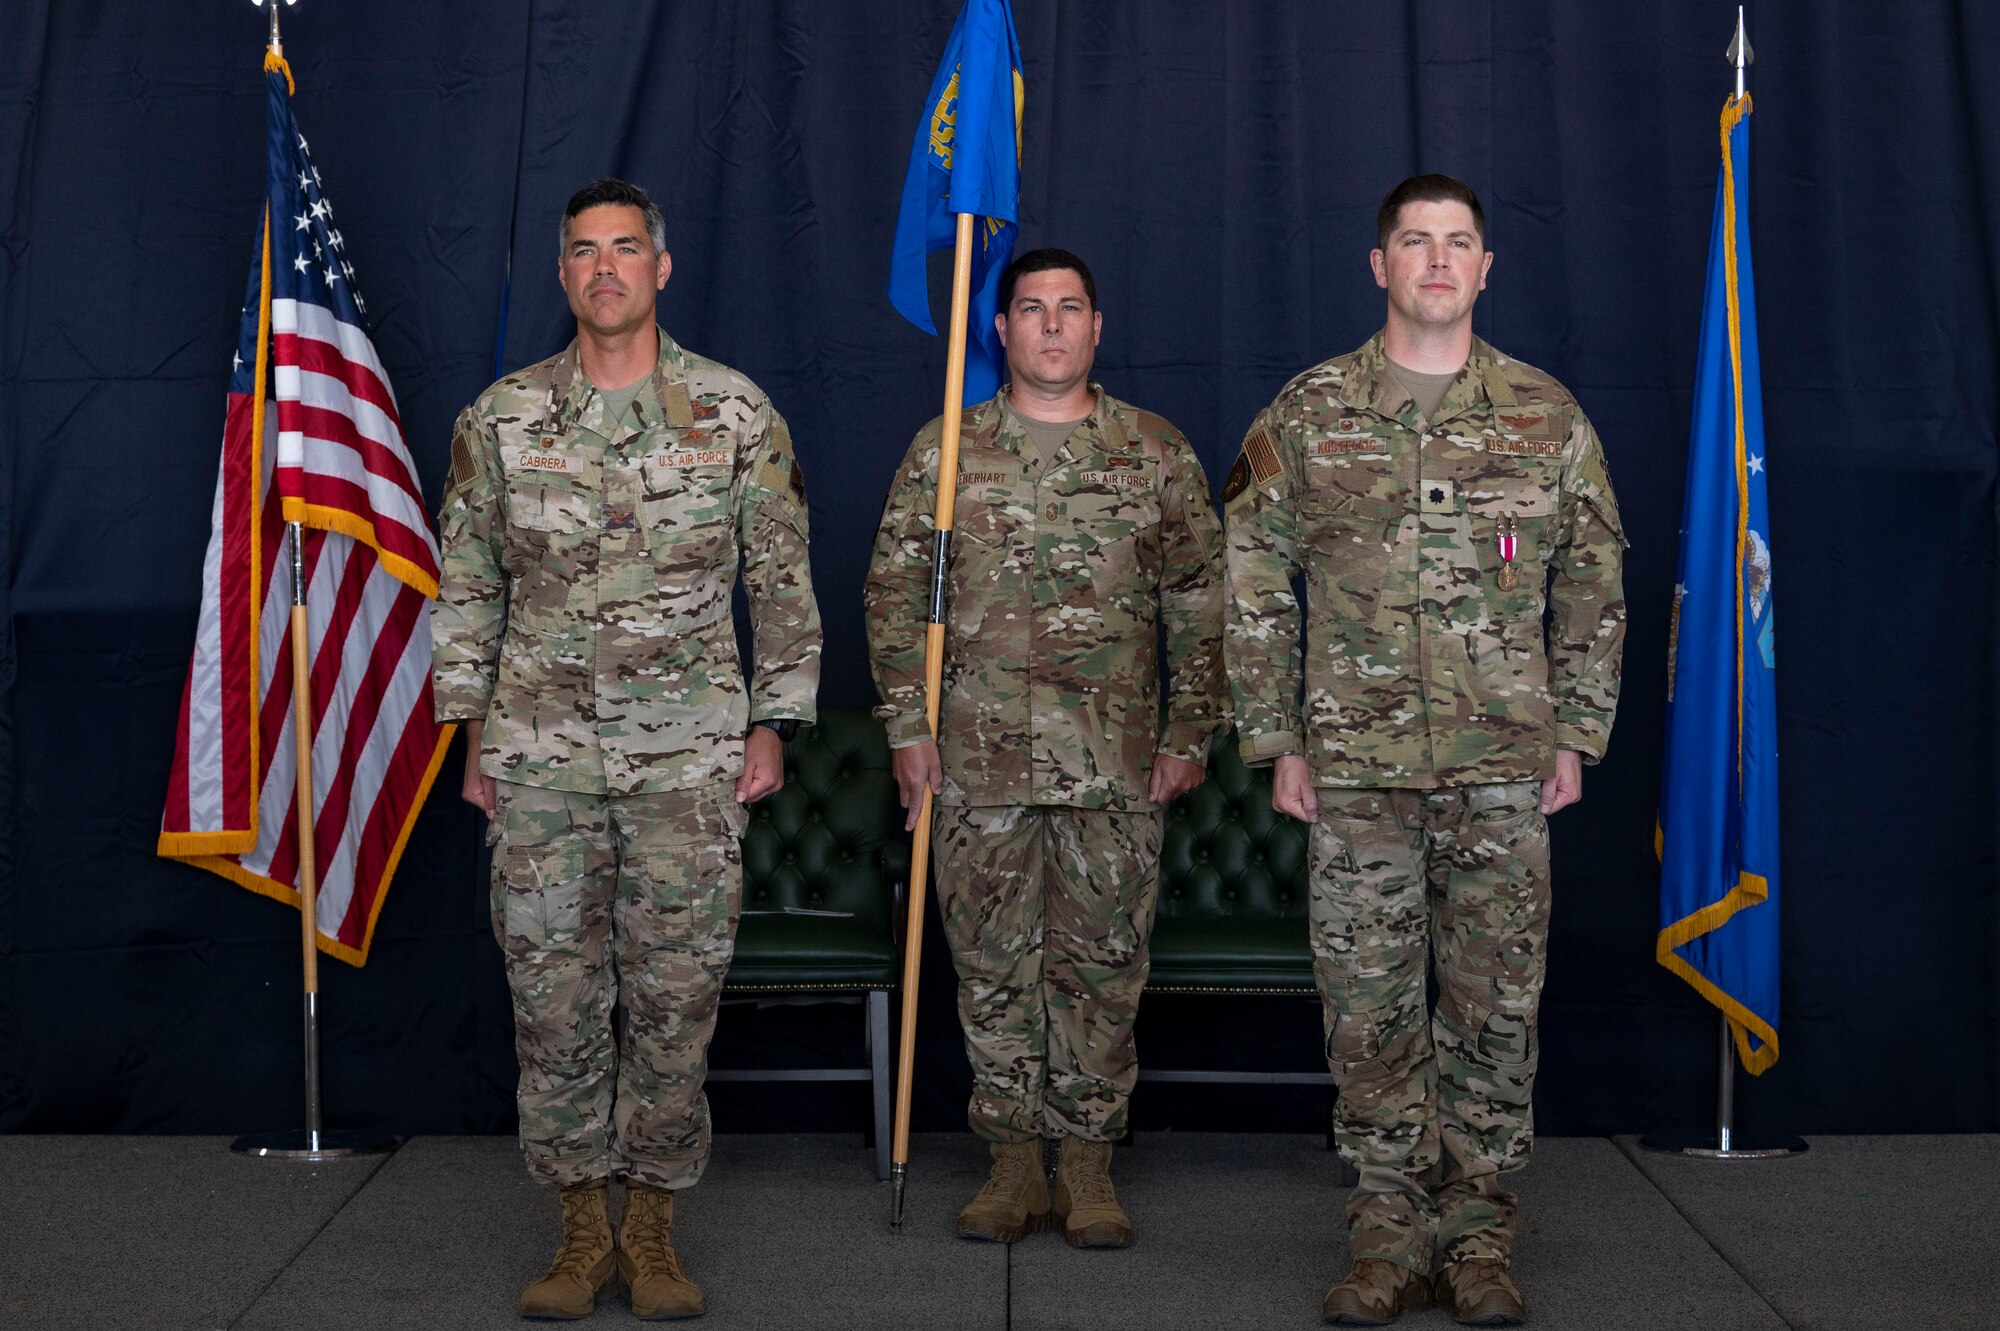 Pictured above are three men in military uniform standing on a stage.